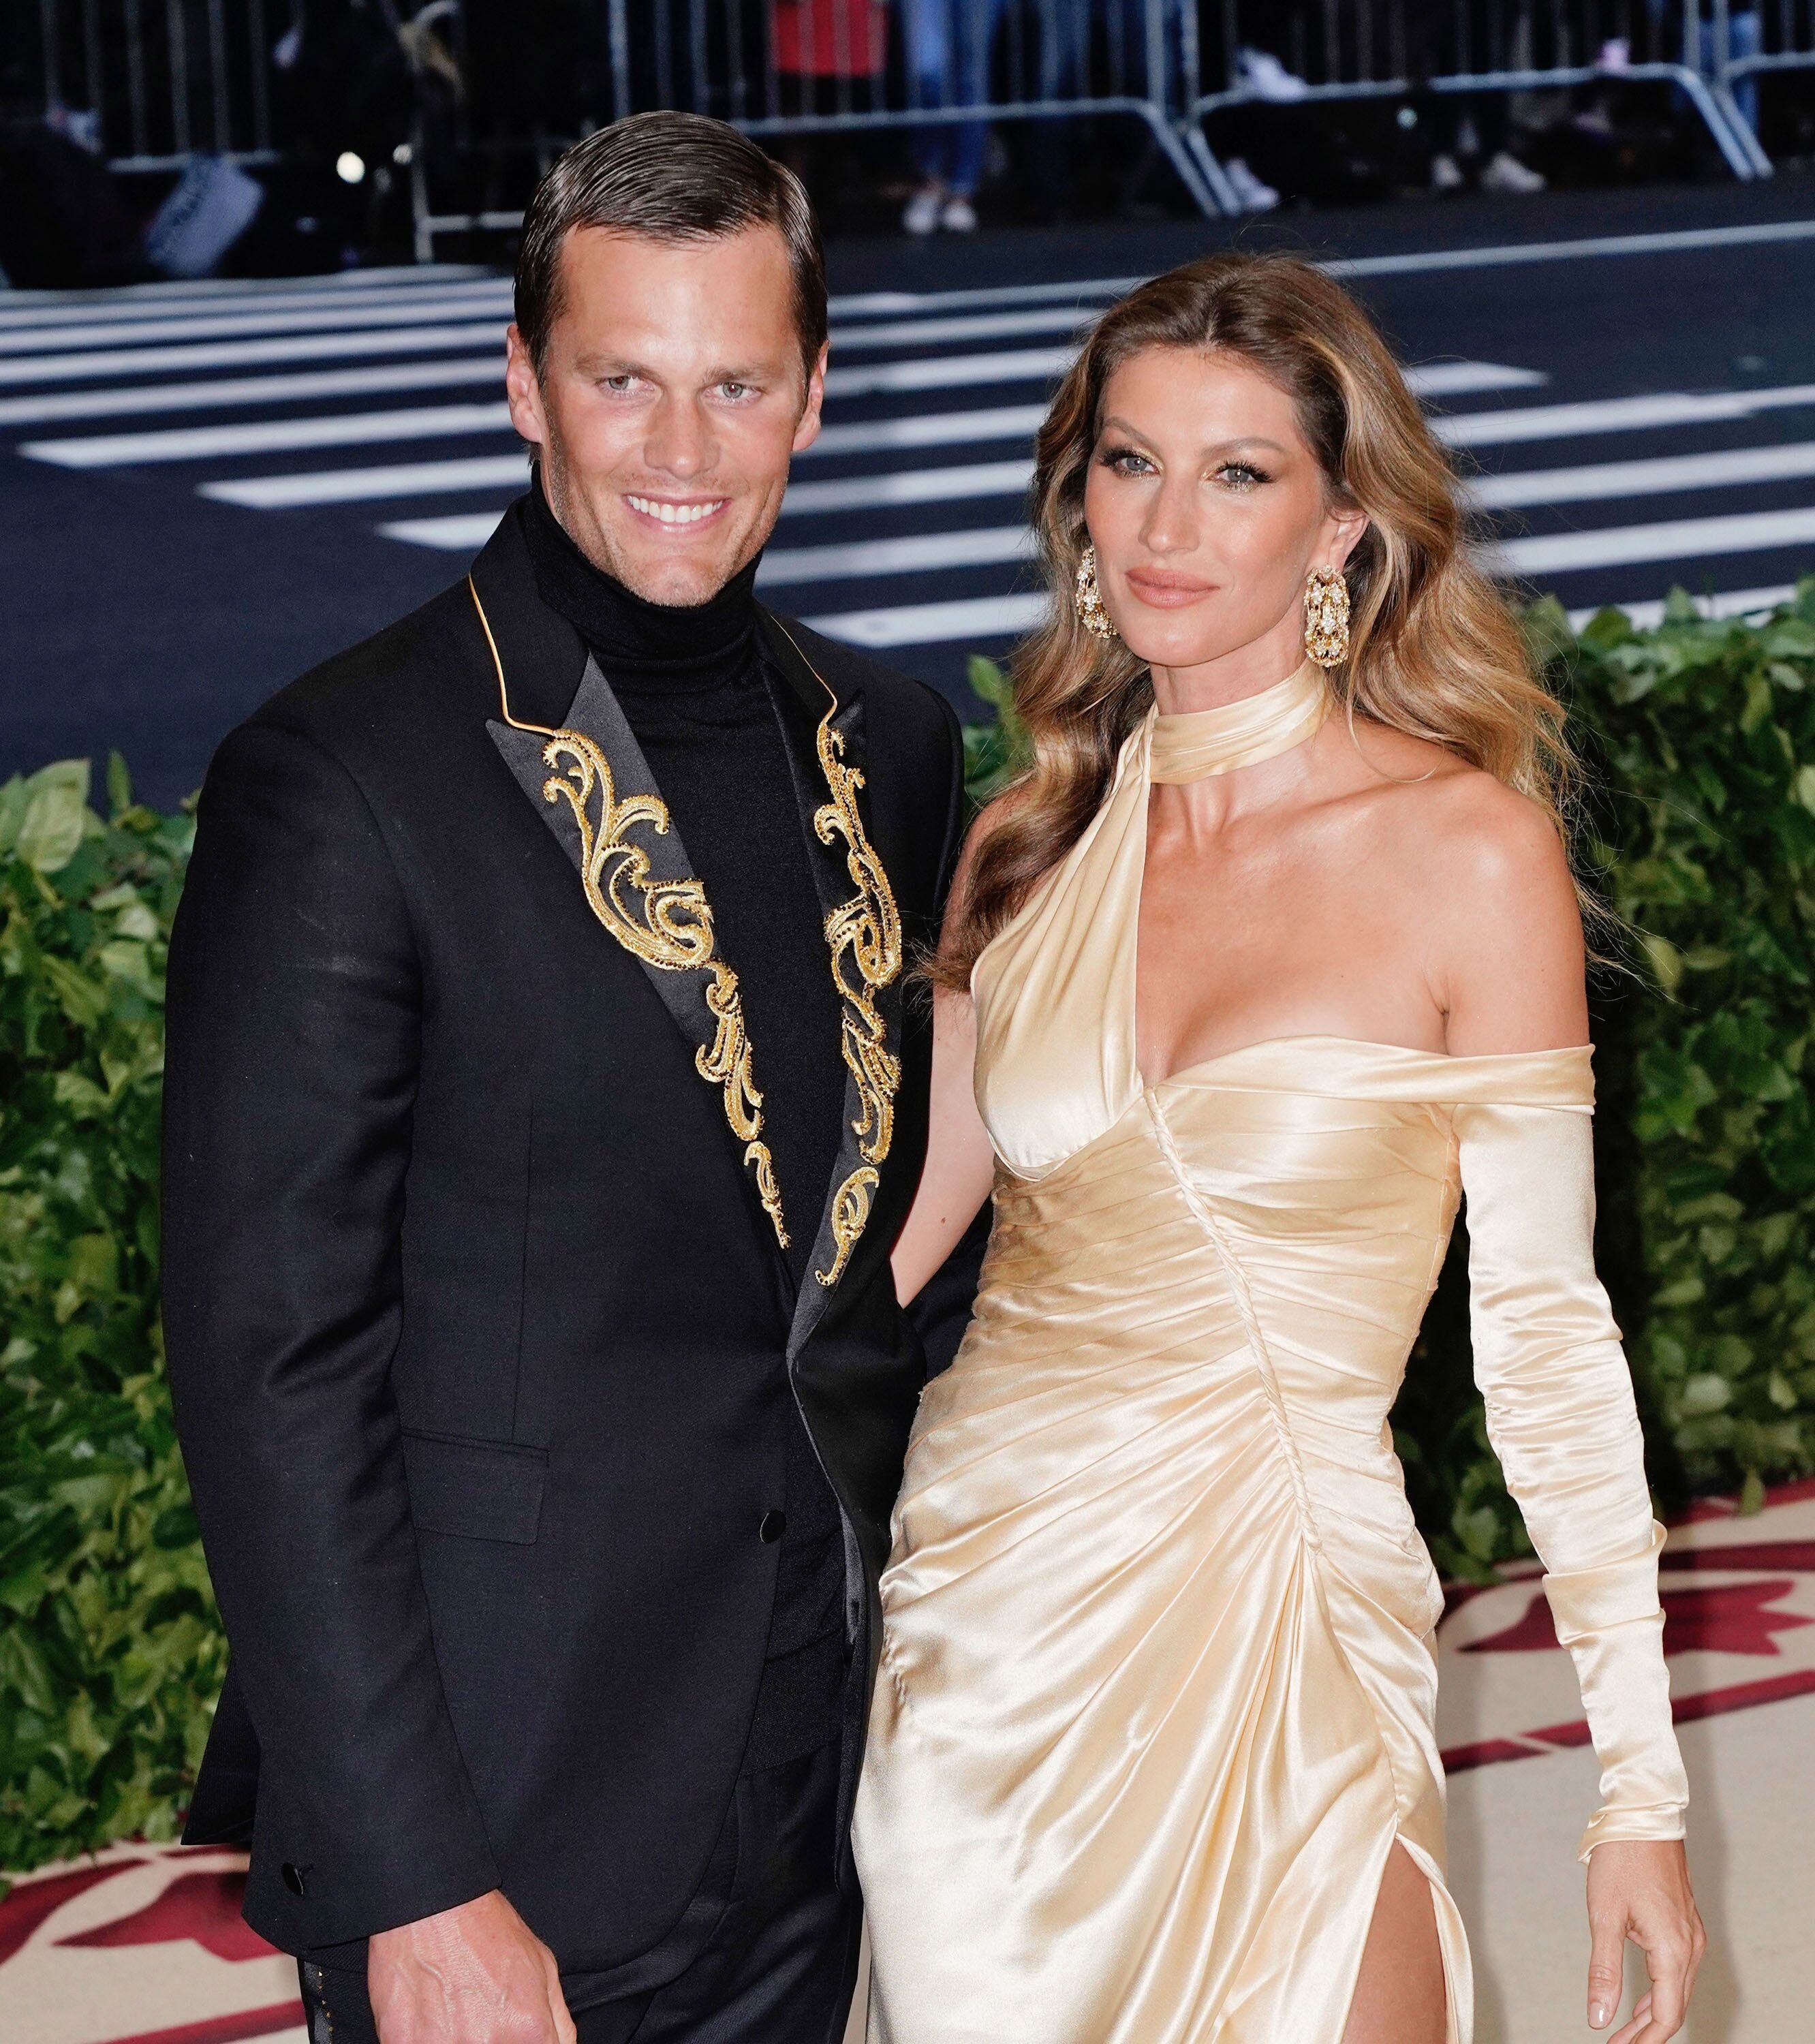 Gisele Bündchen and Tom Brady at the 2018 MET Gala in New York | Photo: Getty Images